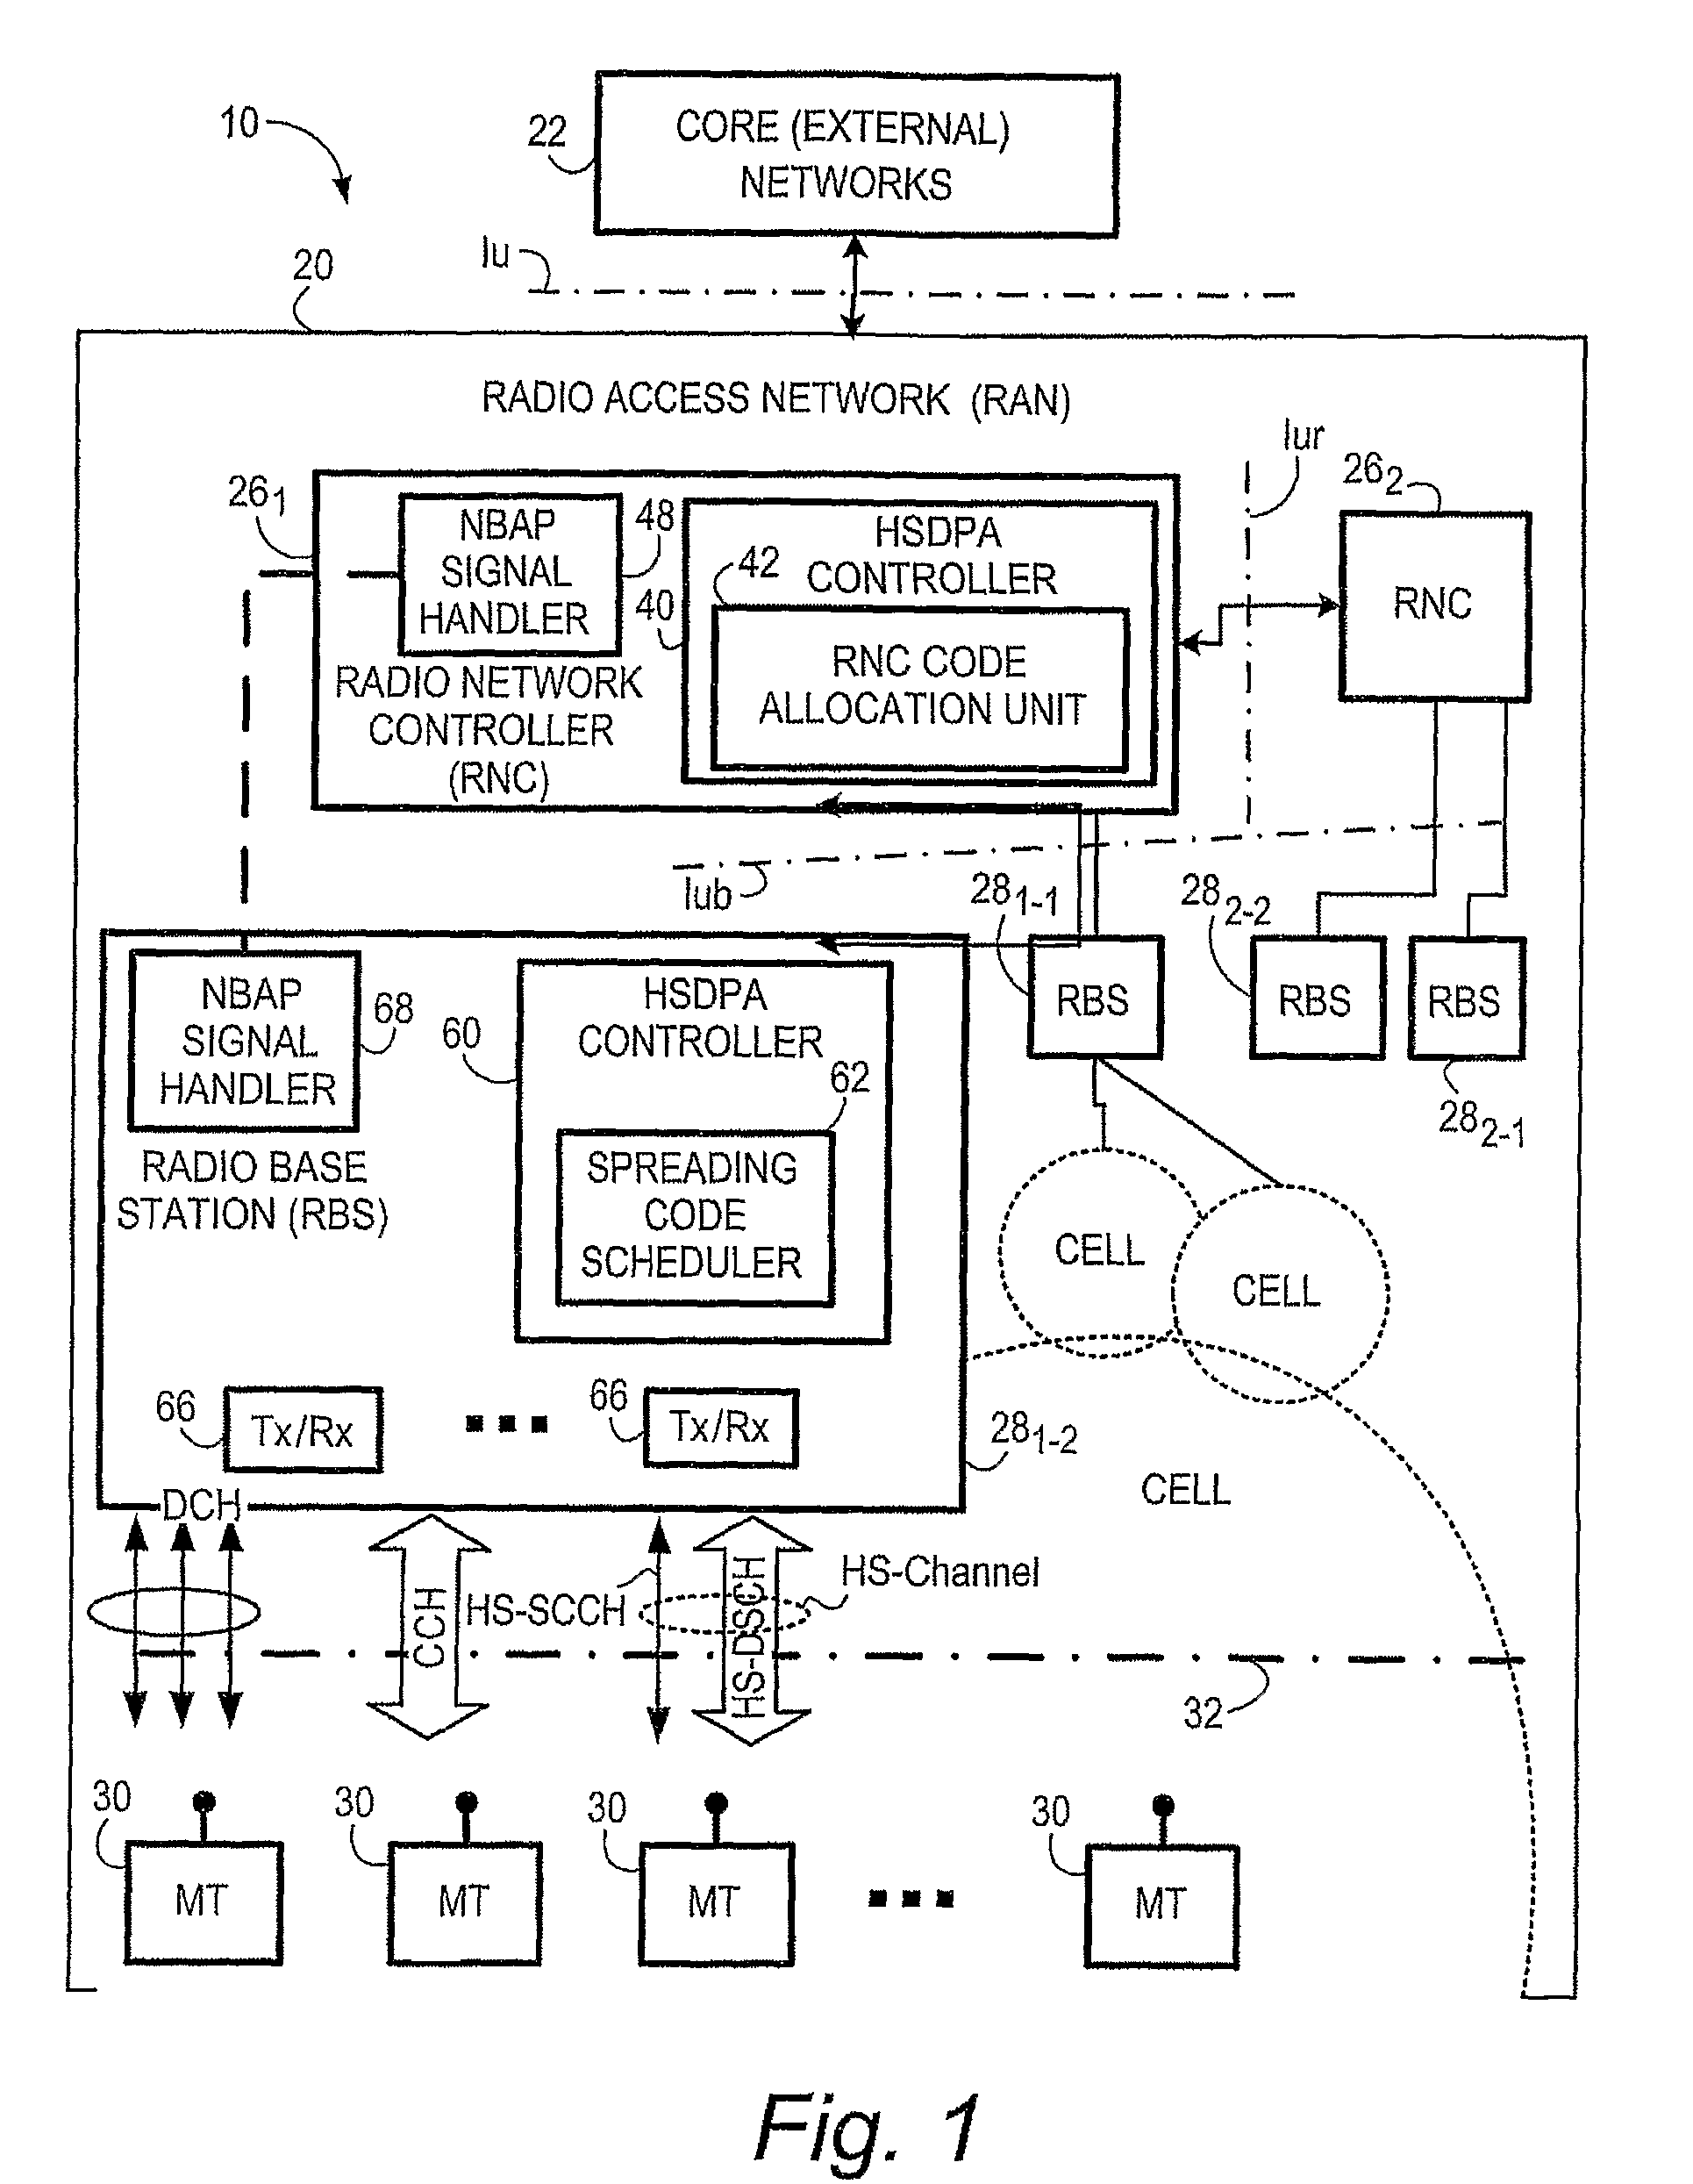 Allocation of spreading codes for telecommunications channels